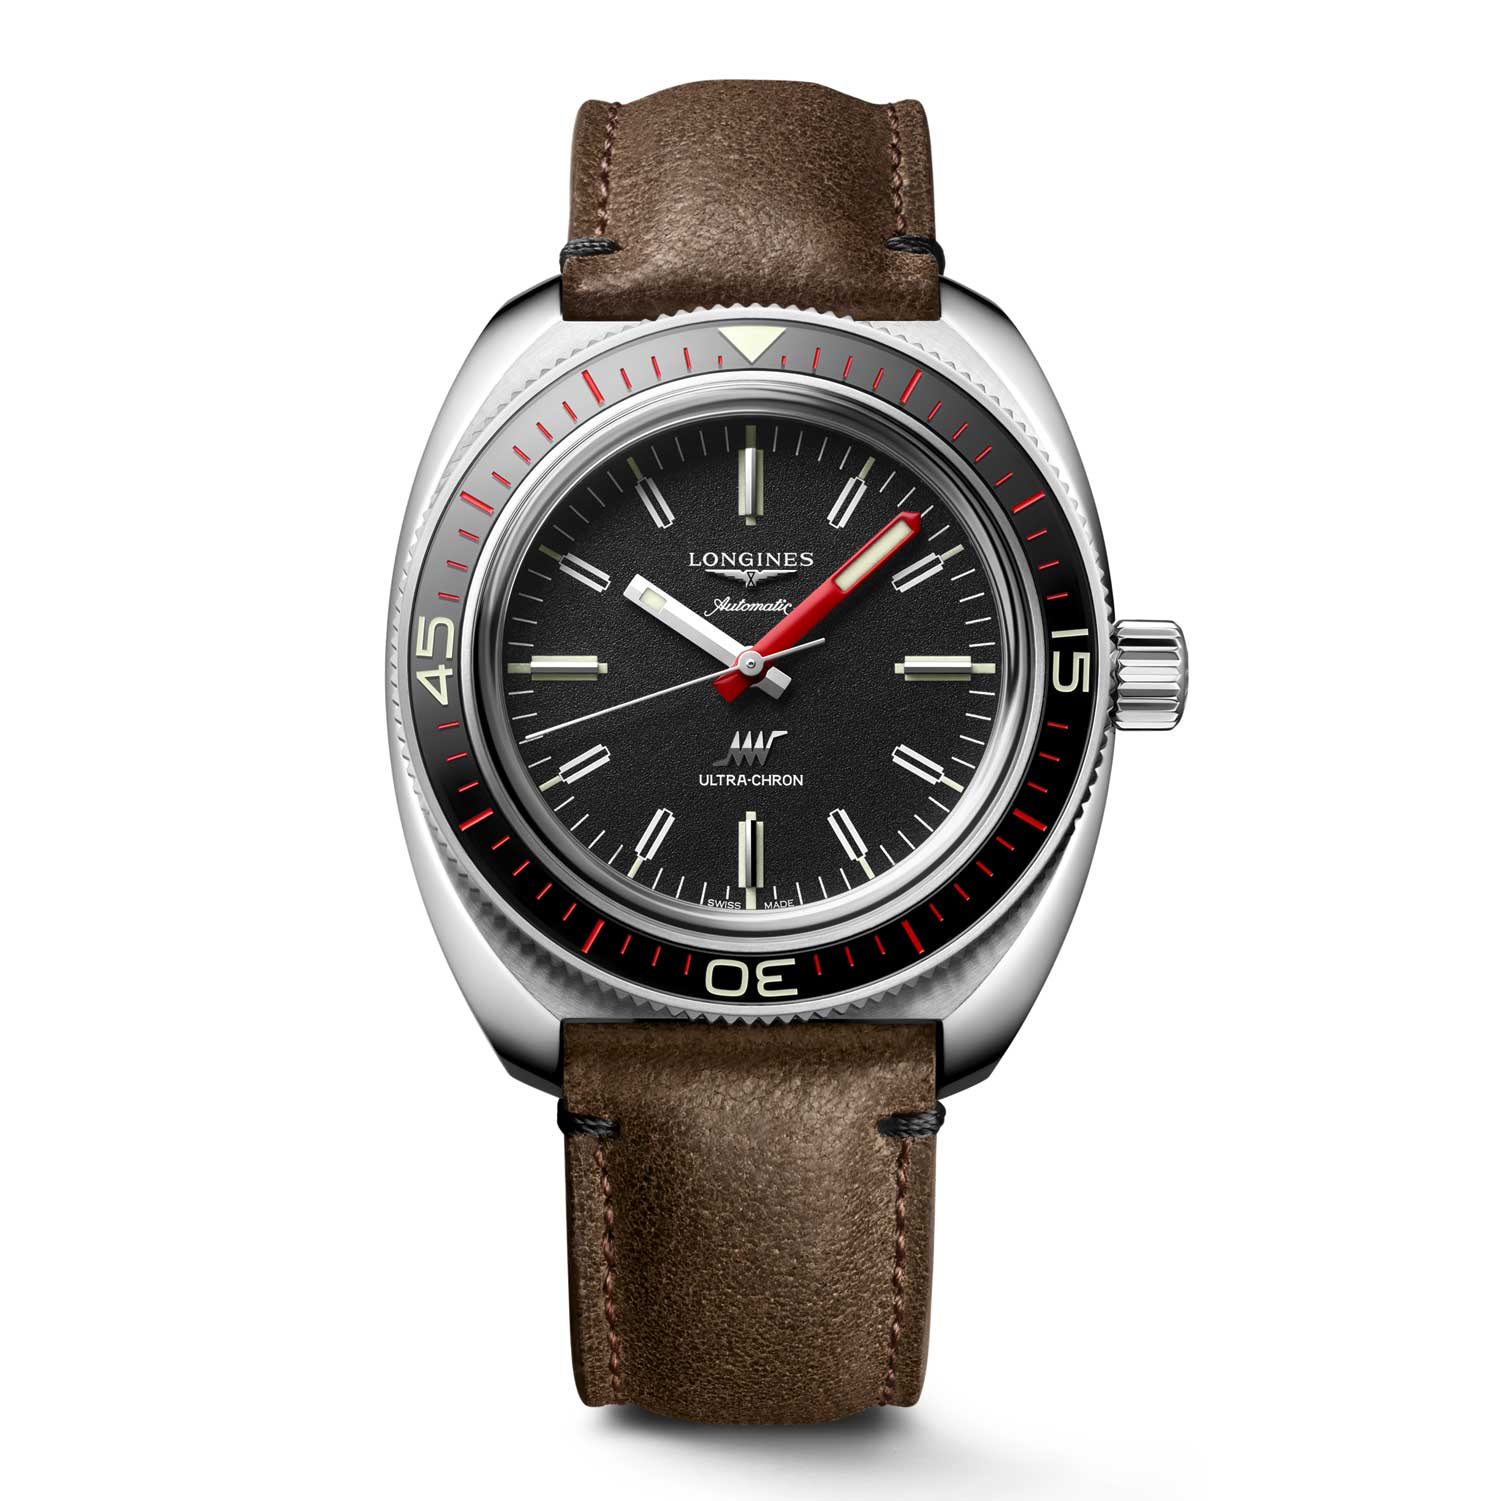 Ref. L2.836.4.52.8 with Leather strap